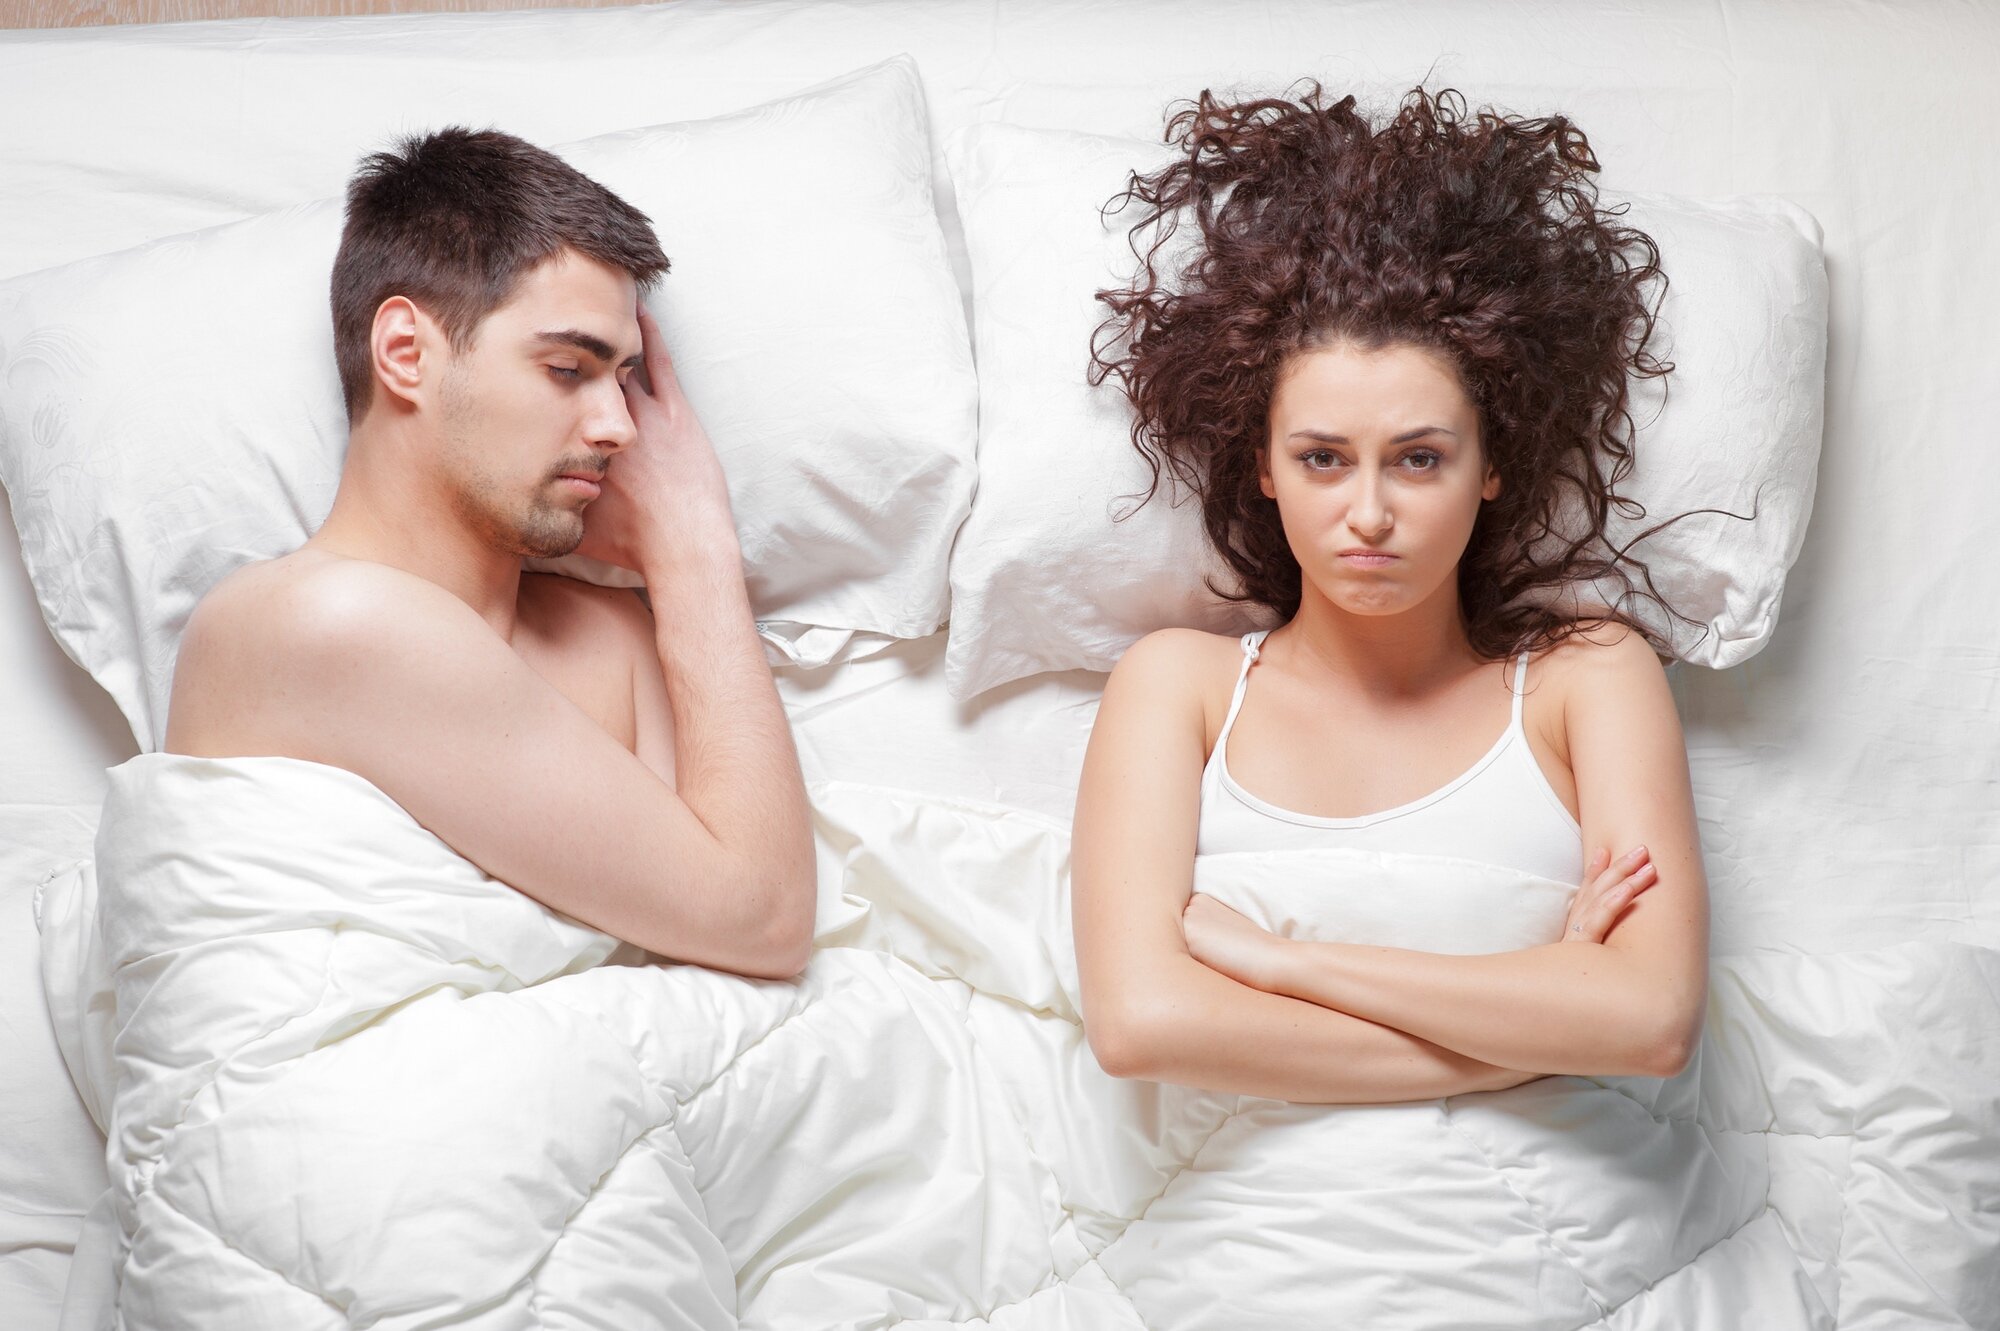 Can’t sleep? Do you know the optimal room temperature to get the perfect sleep?